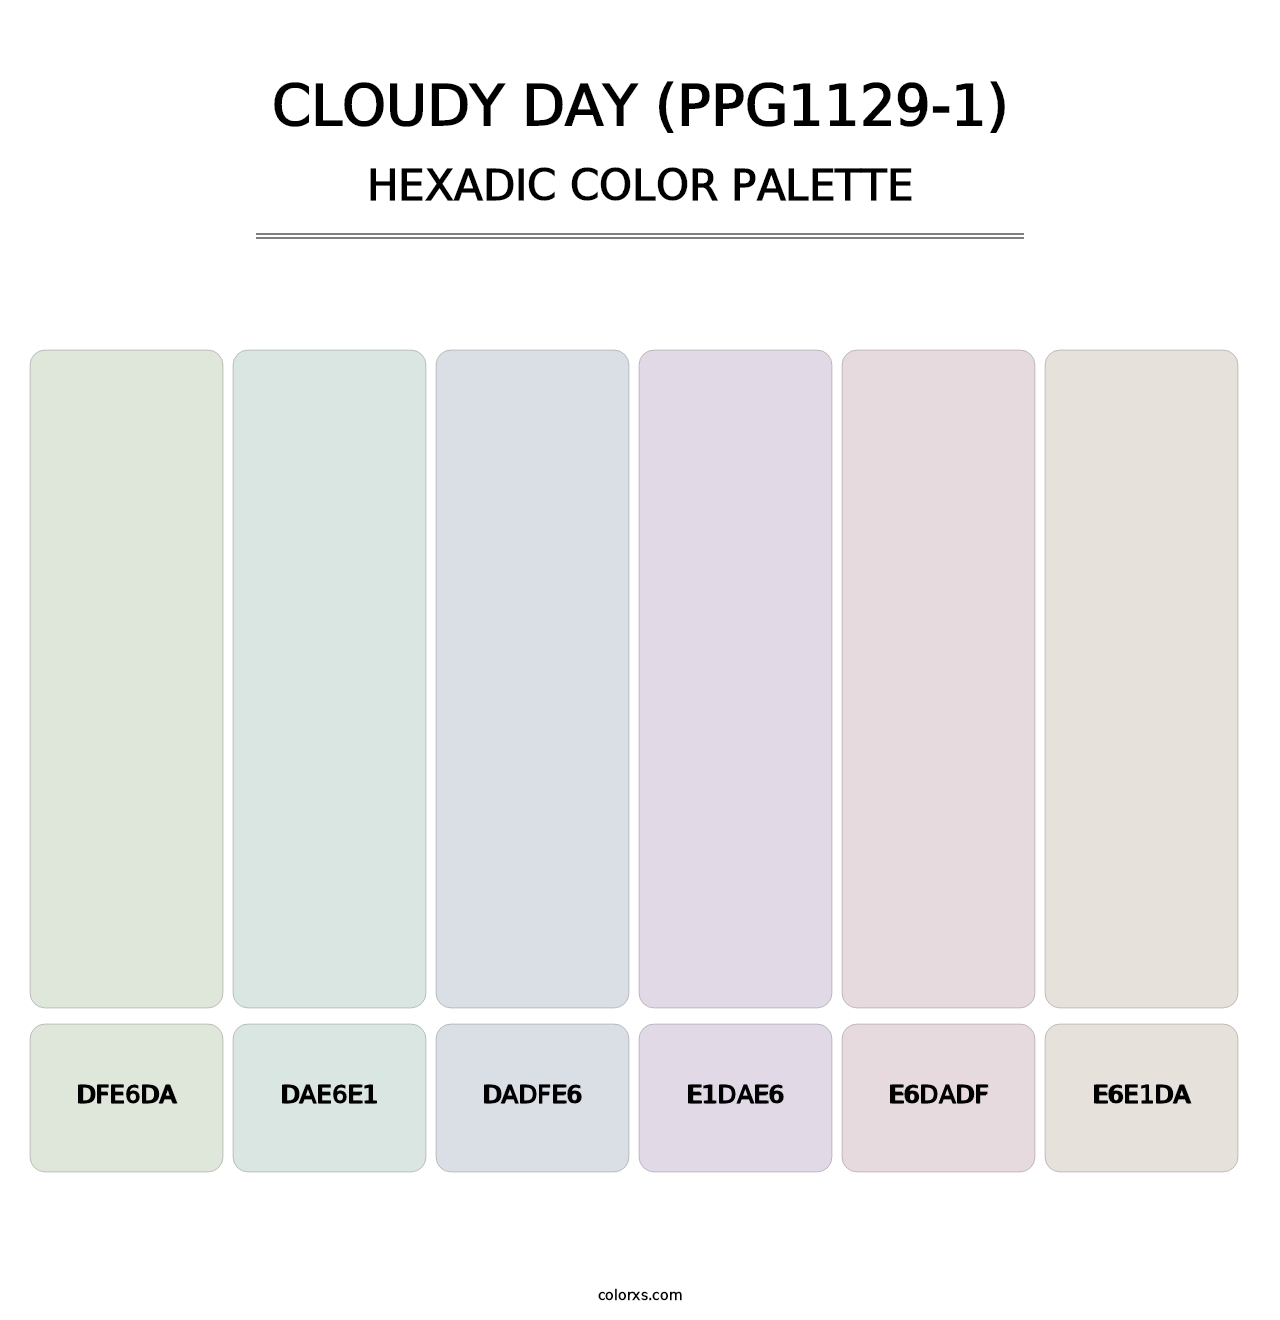 Cloudy Day (PPG1129-1) - Hexadic Color Palette